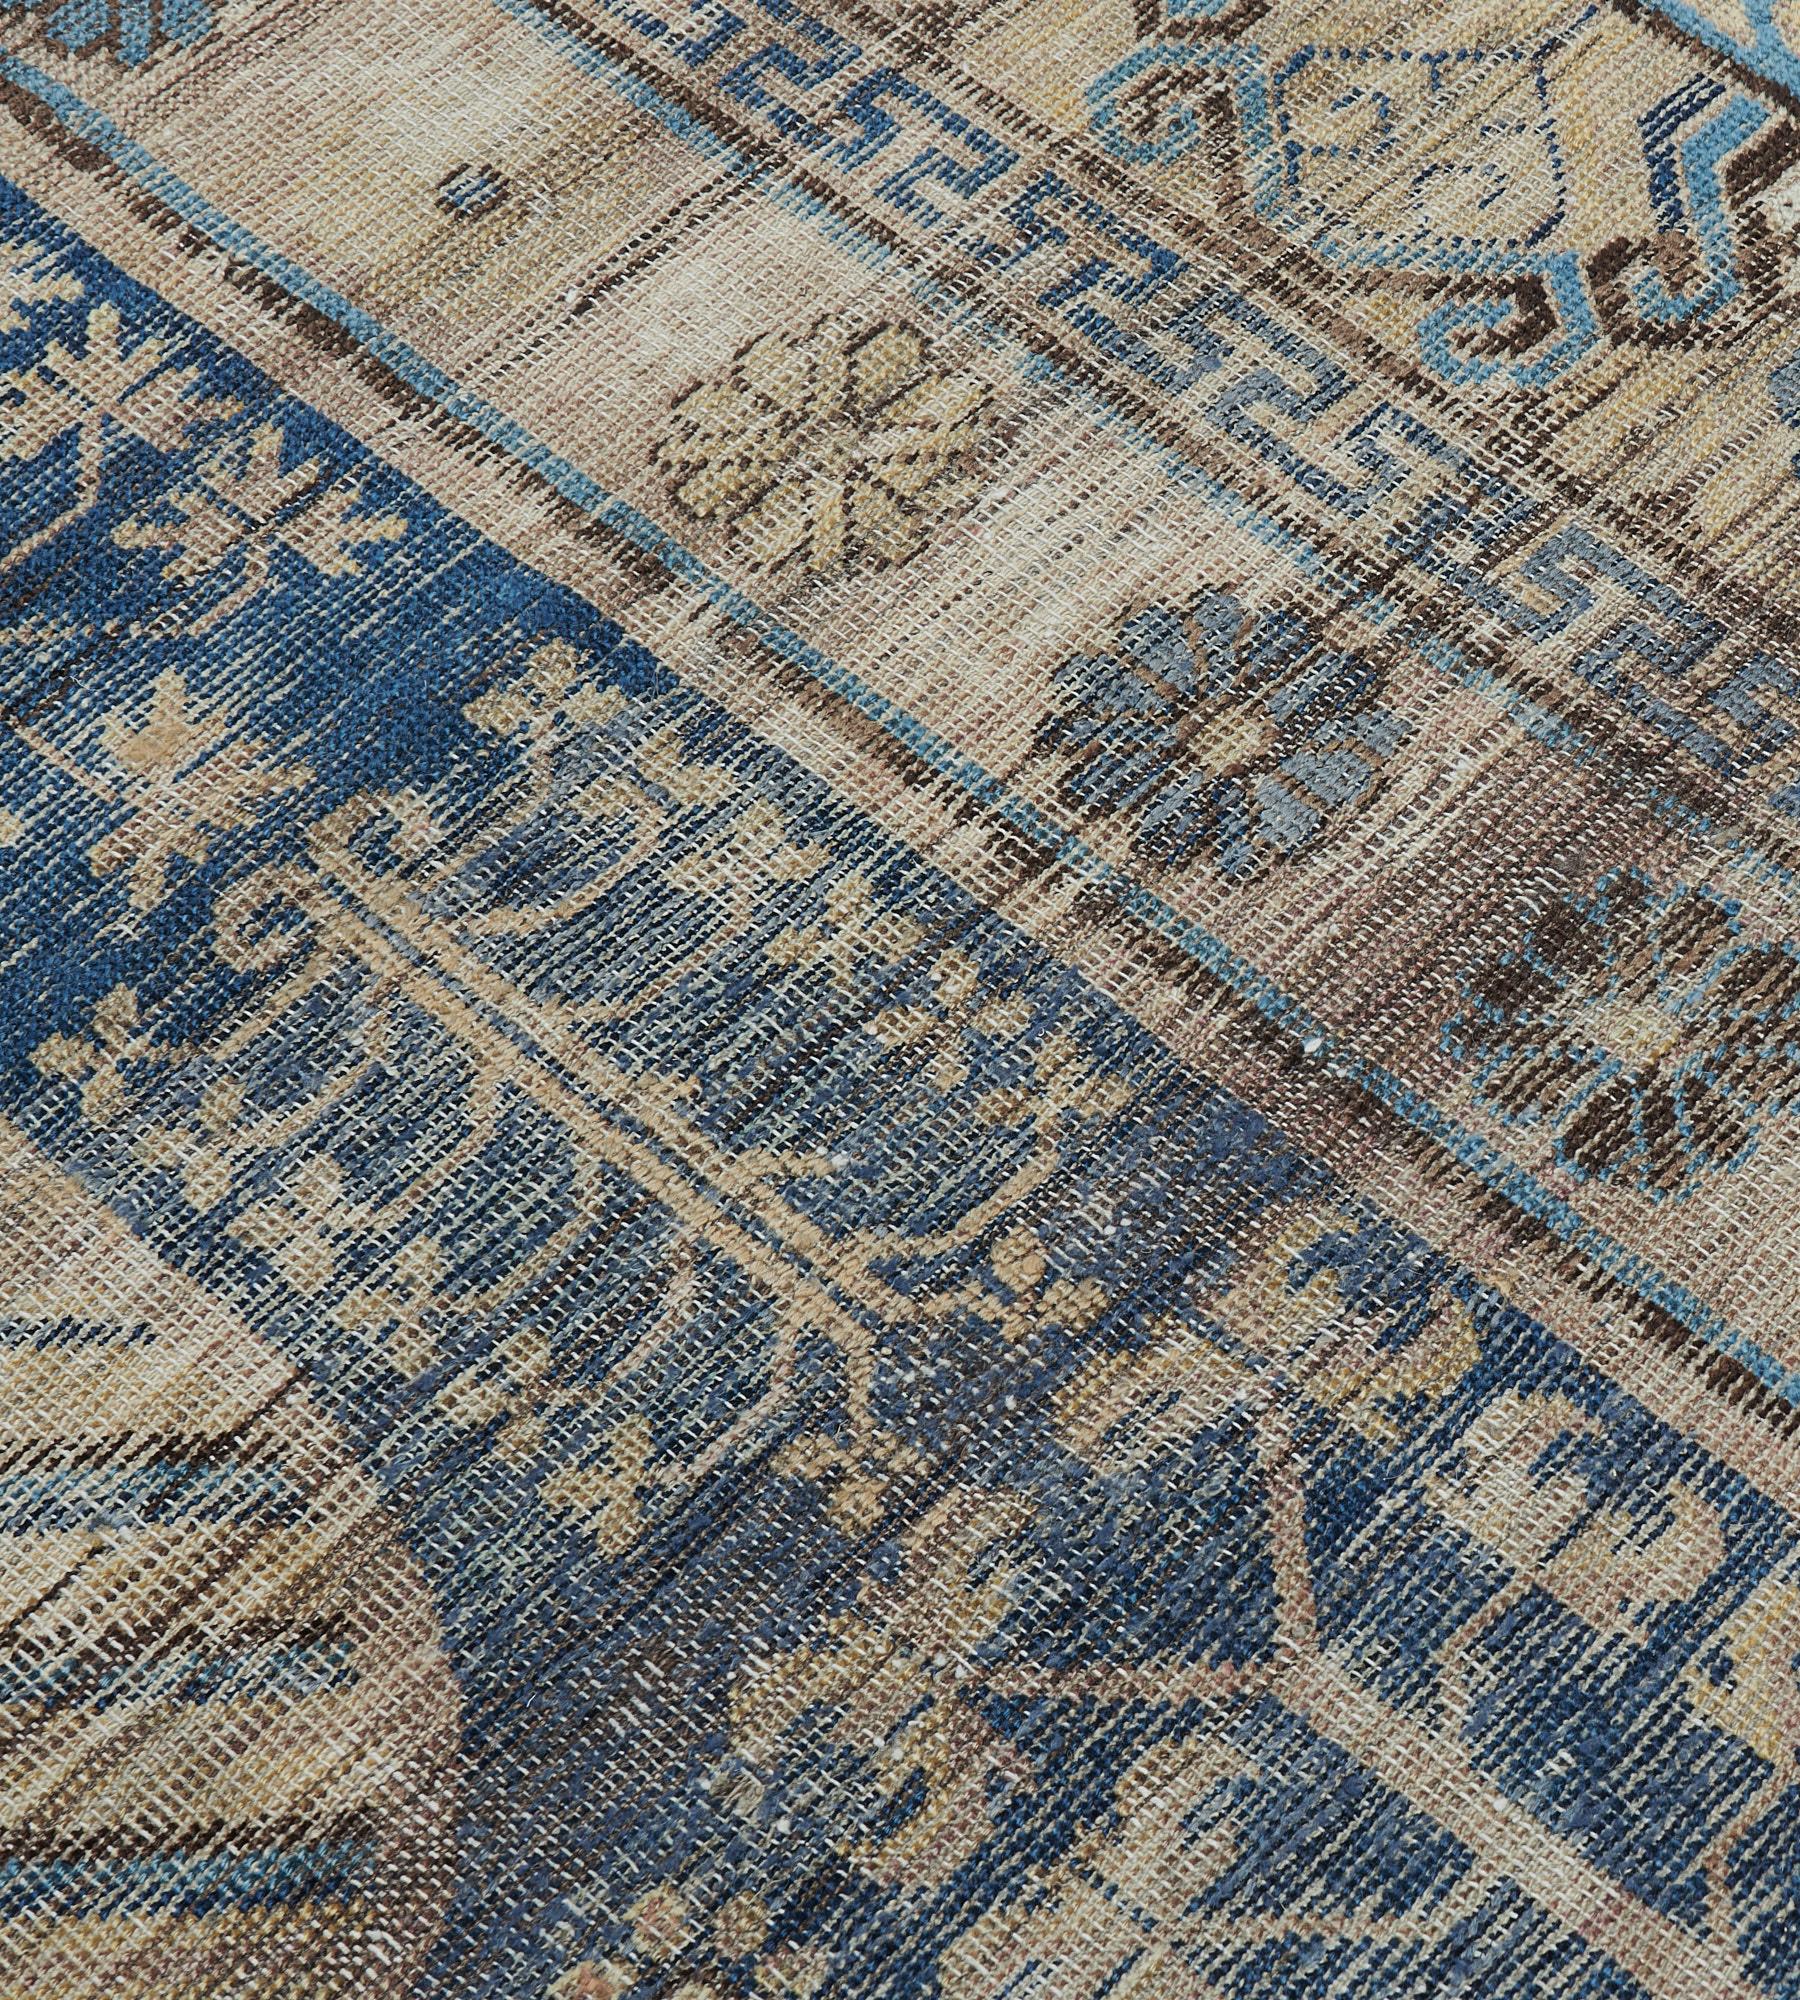 Handwoven Antique Blue Khotan Rug from East Turkestan In Good Condition For Sale In West Hollywood, CA